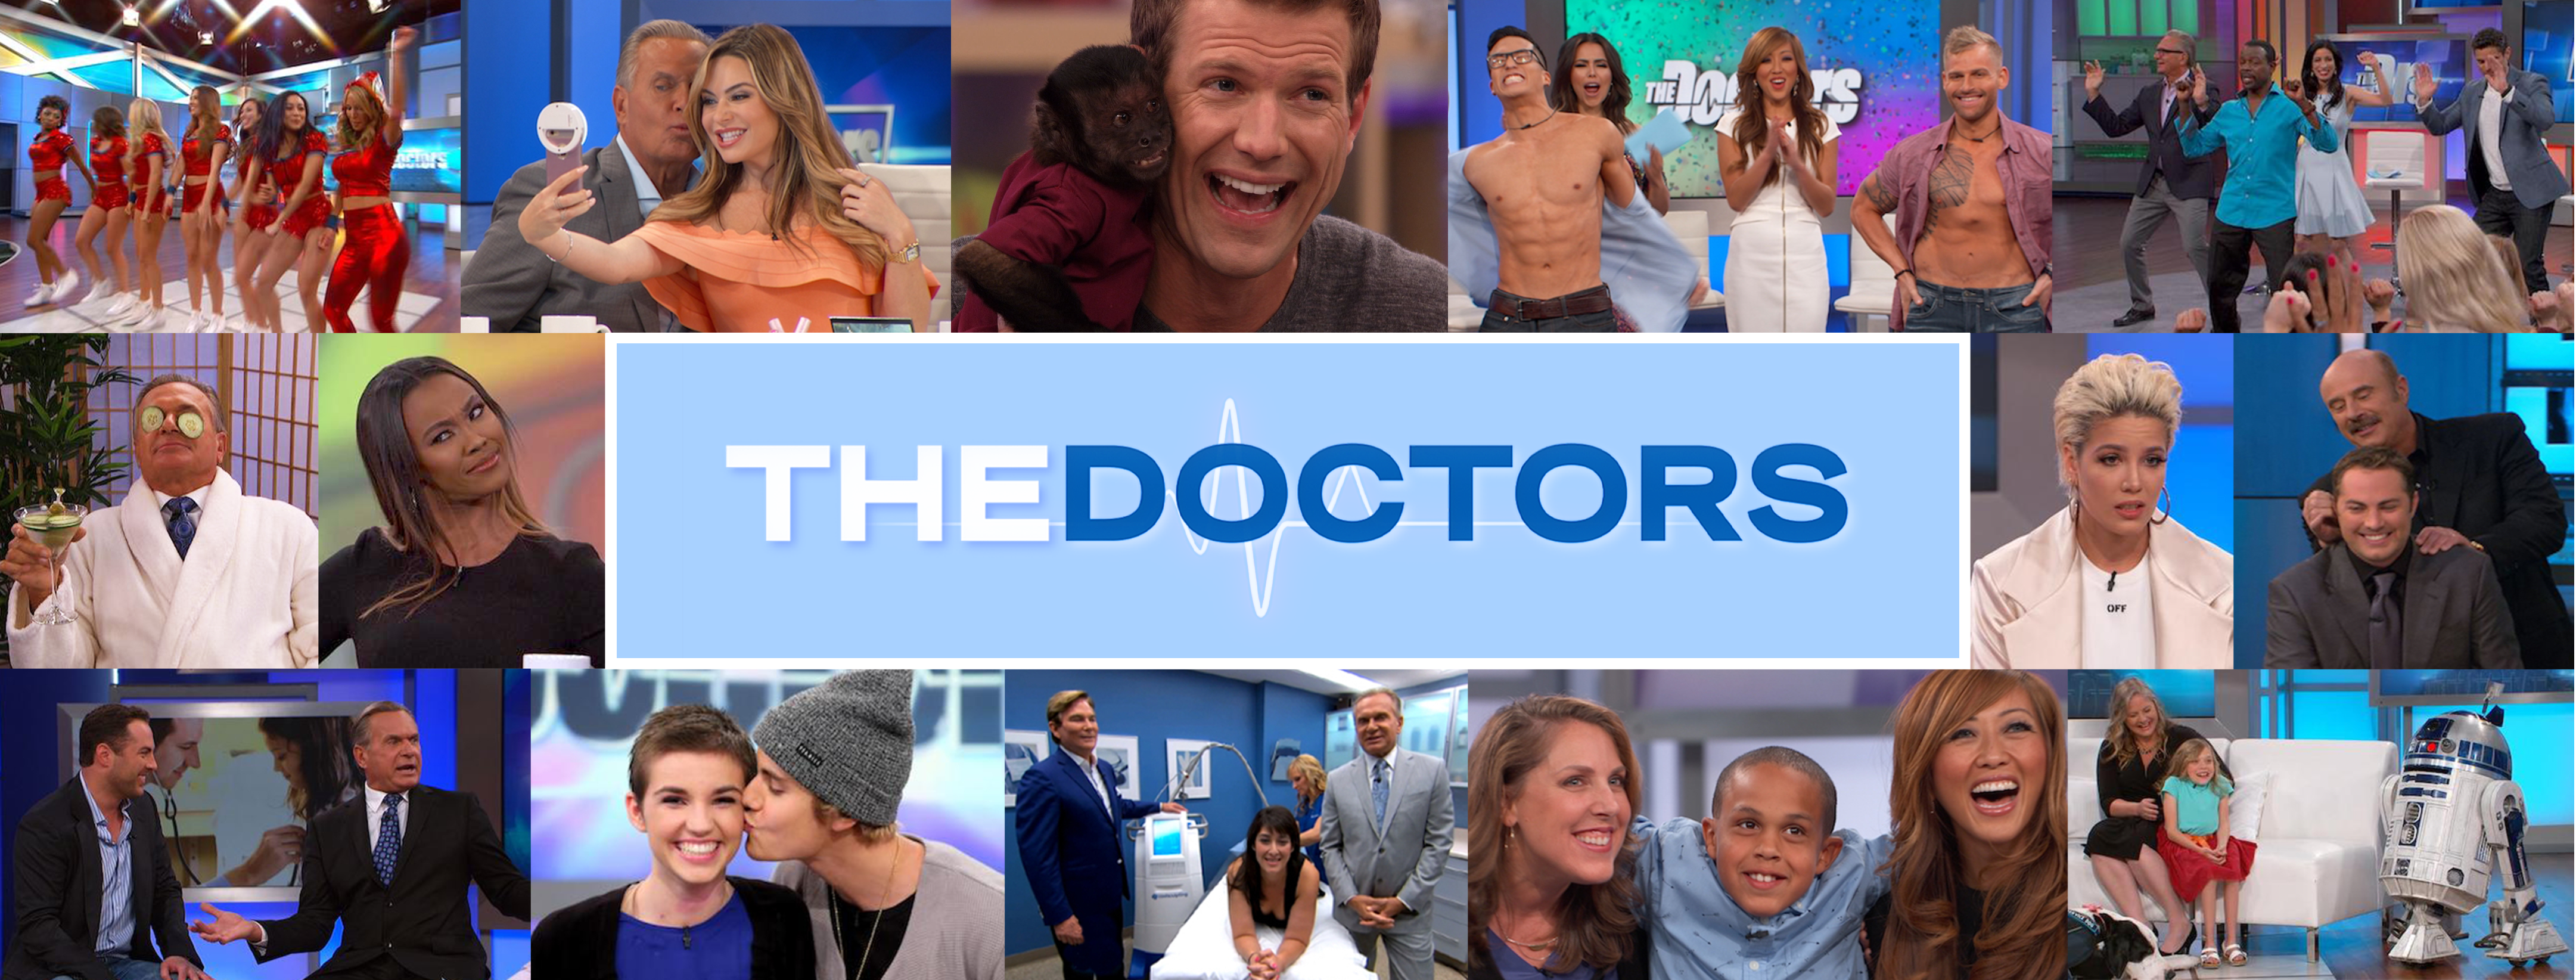 Discount On Cpr Classes The Doctors Tv Show